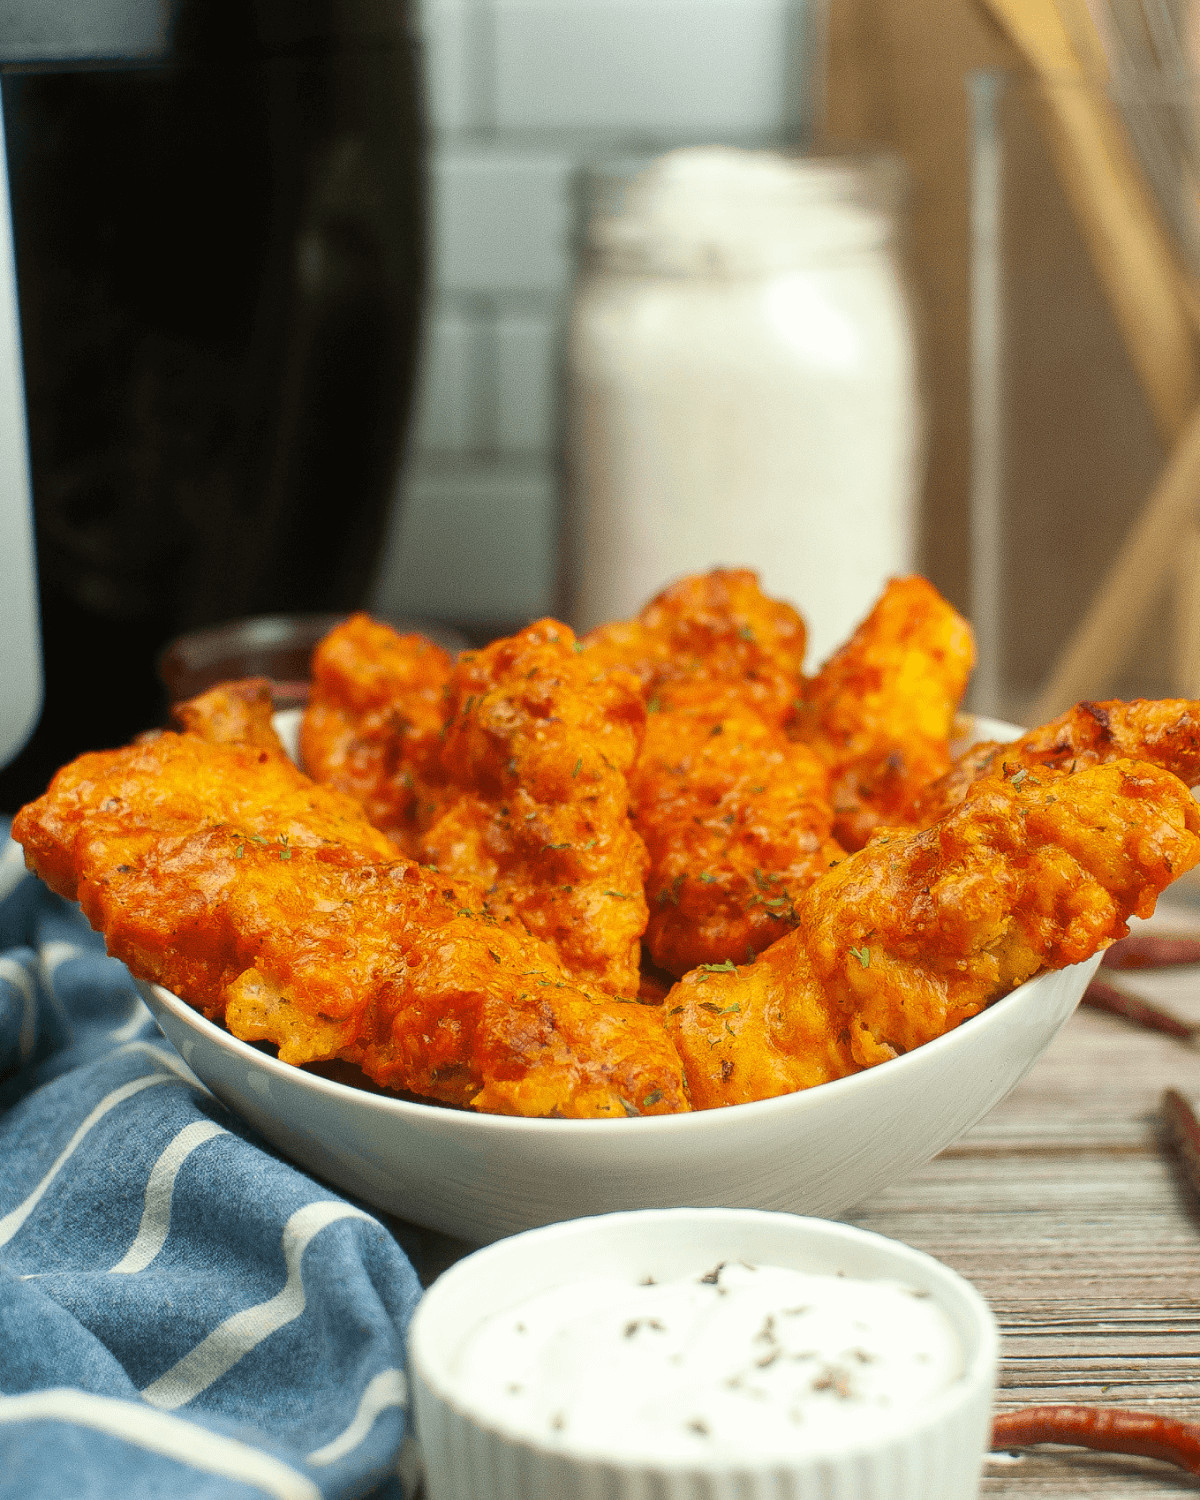 A heaping bowl of the air fryer buffalo chicken tenders with a side of dipping sauce.